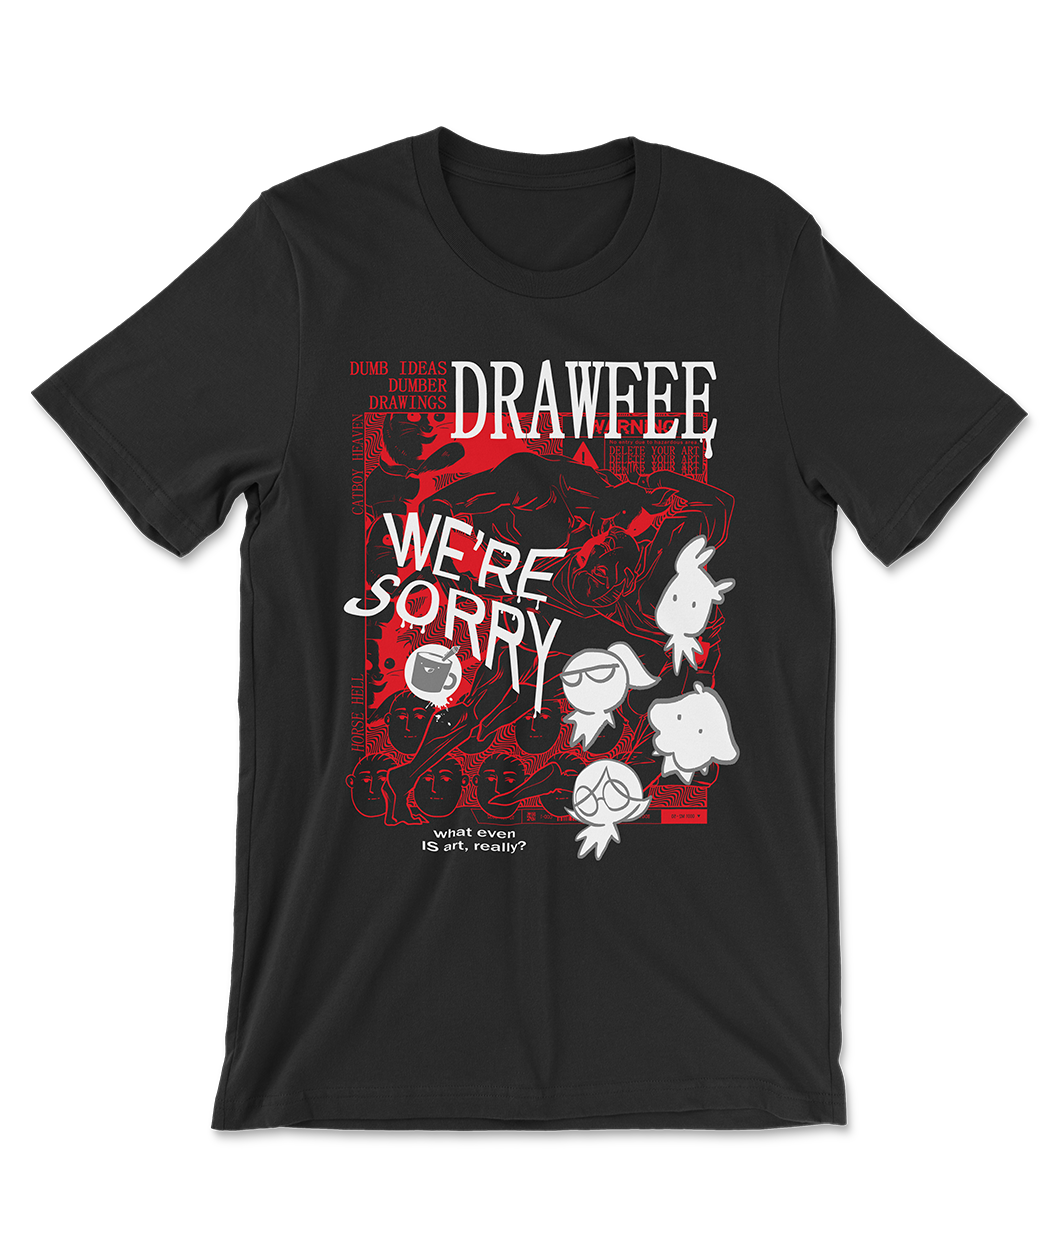 A black t-shirt with red and white illustrations and text that reads 